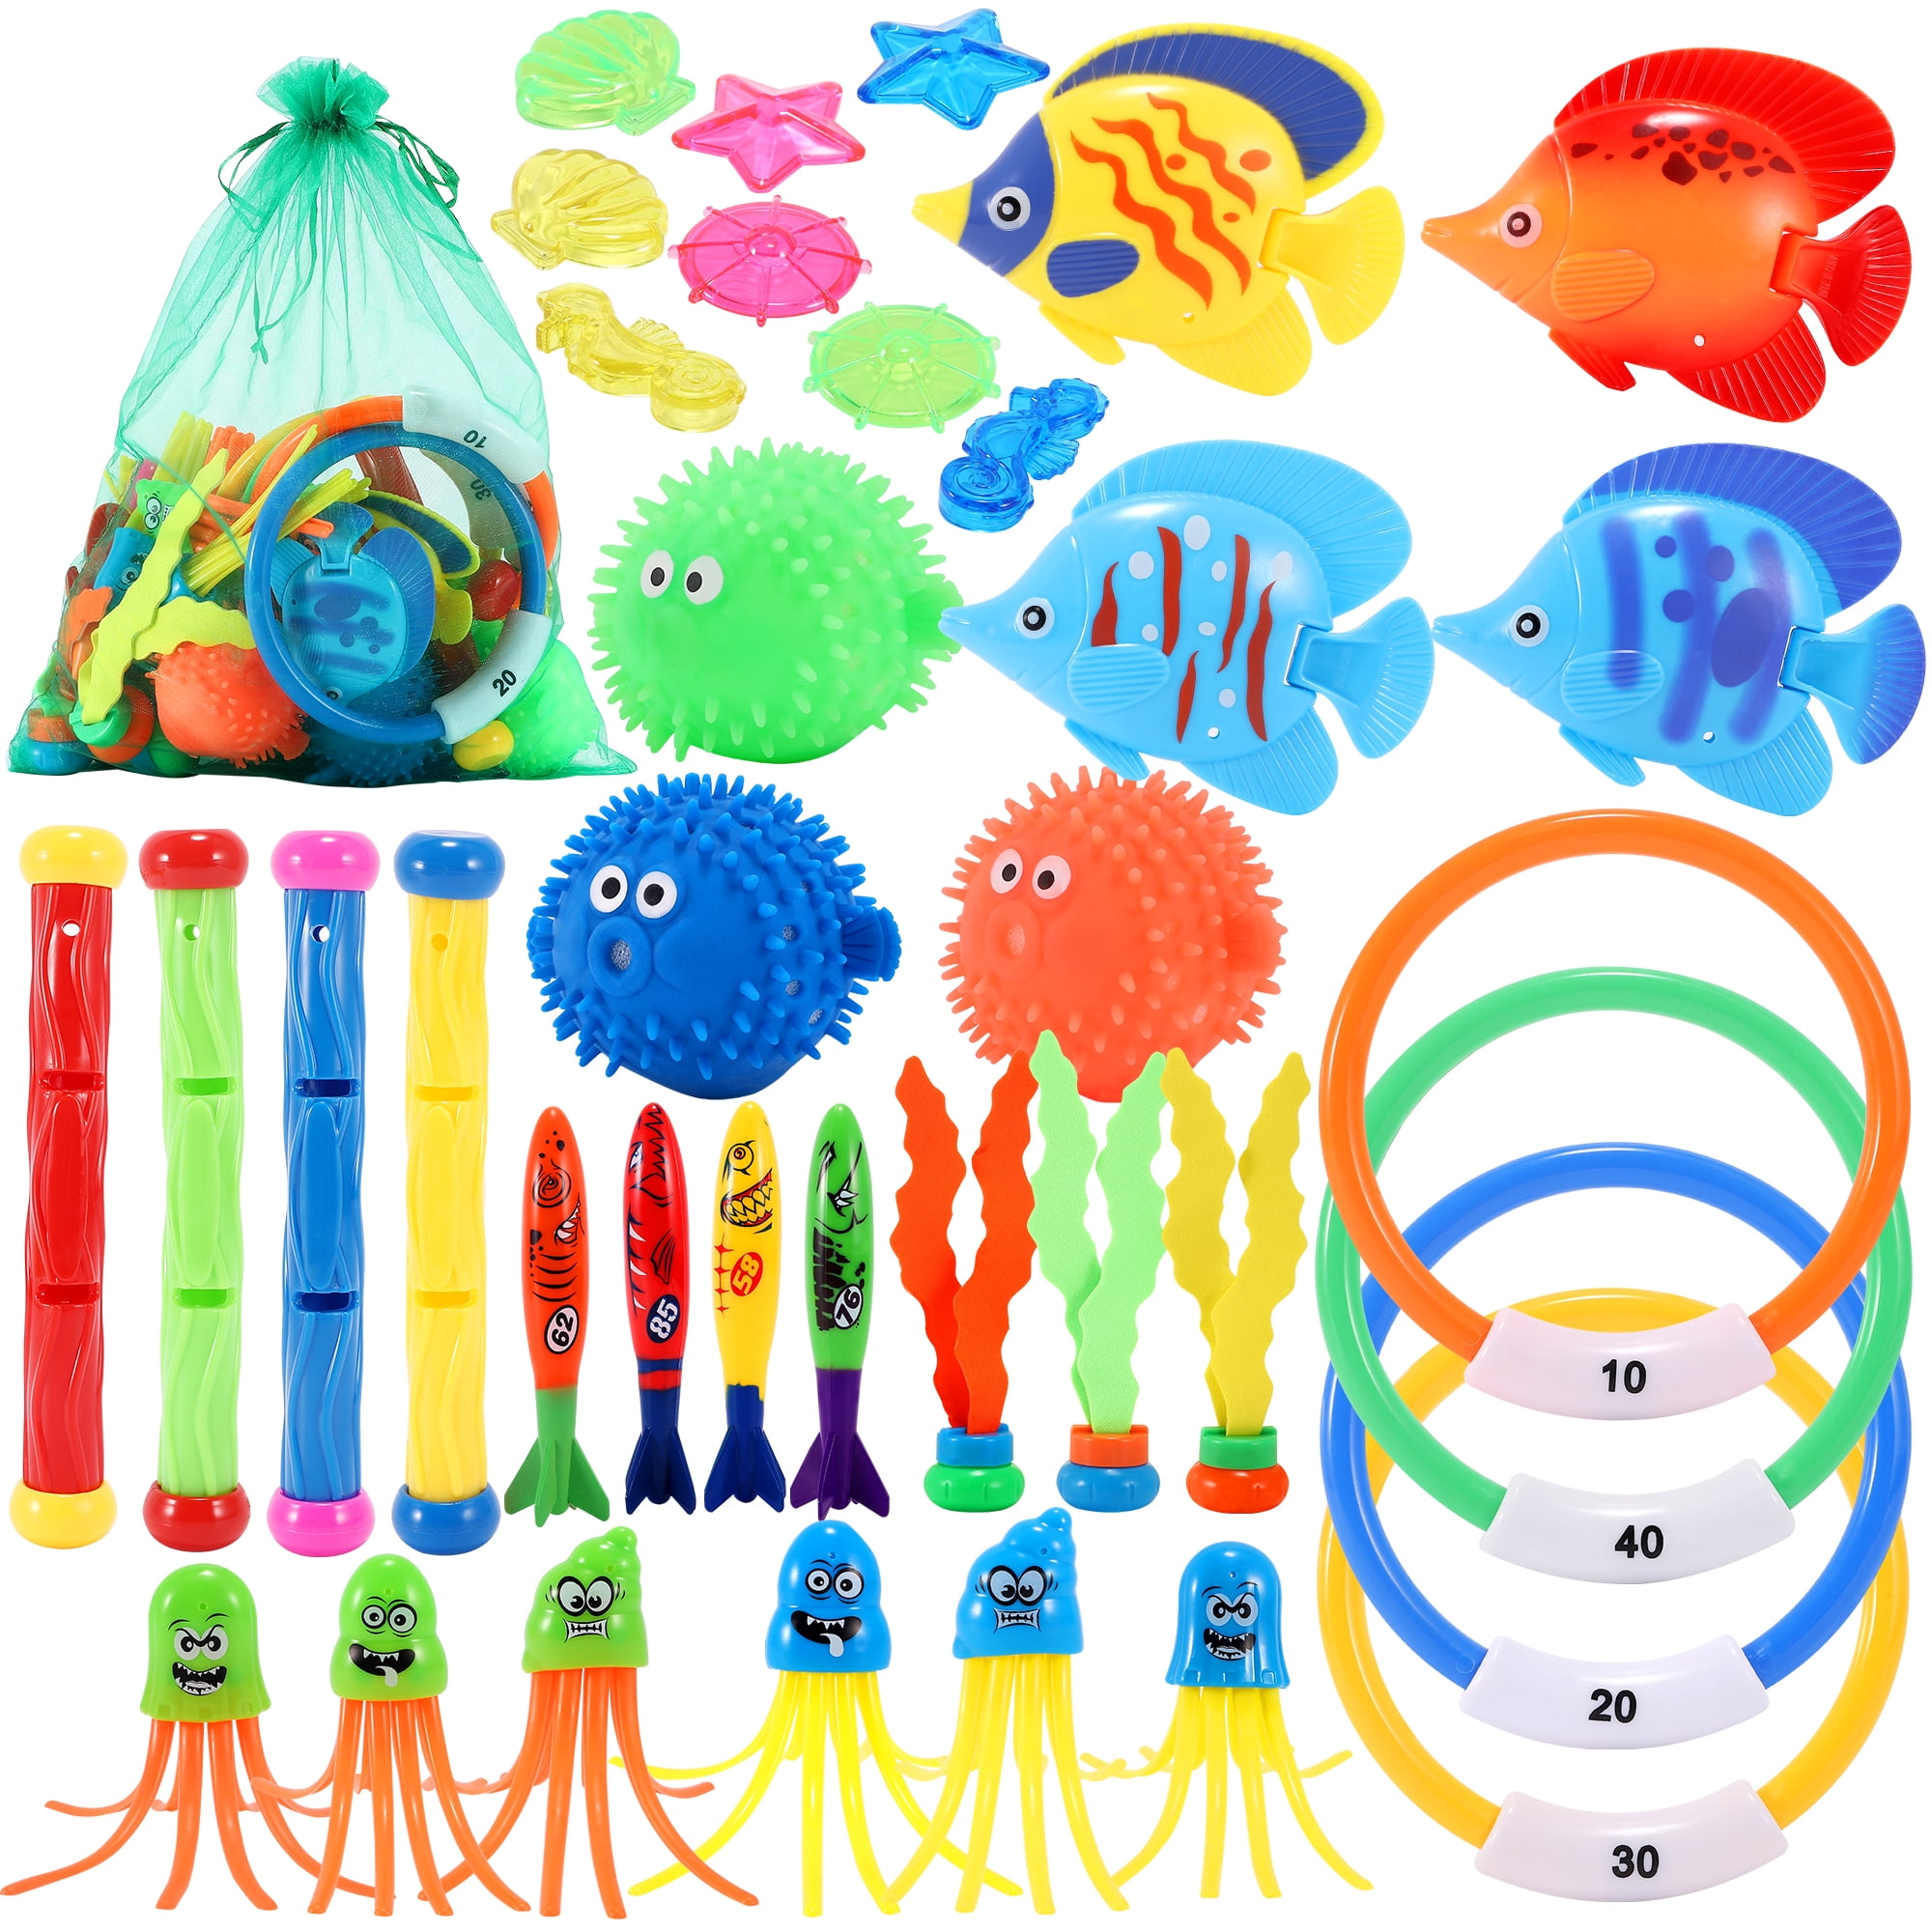 8 Jewel Gem Treasure Weighted Dive Toy 19PCS Underwater Swimming Diving Pool Toys 3 Stringy Octopu 4 Dive Rings Summer Under Water Pool Training Toys Treasures Gift Set Bundle 4 Toypedo Bandits 